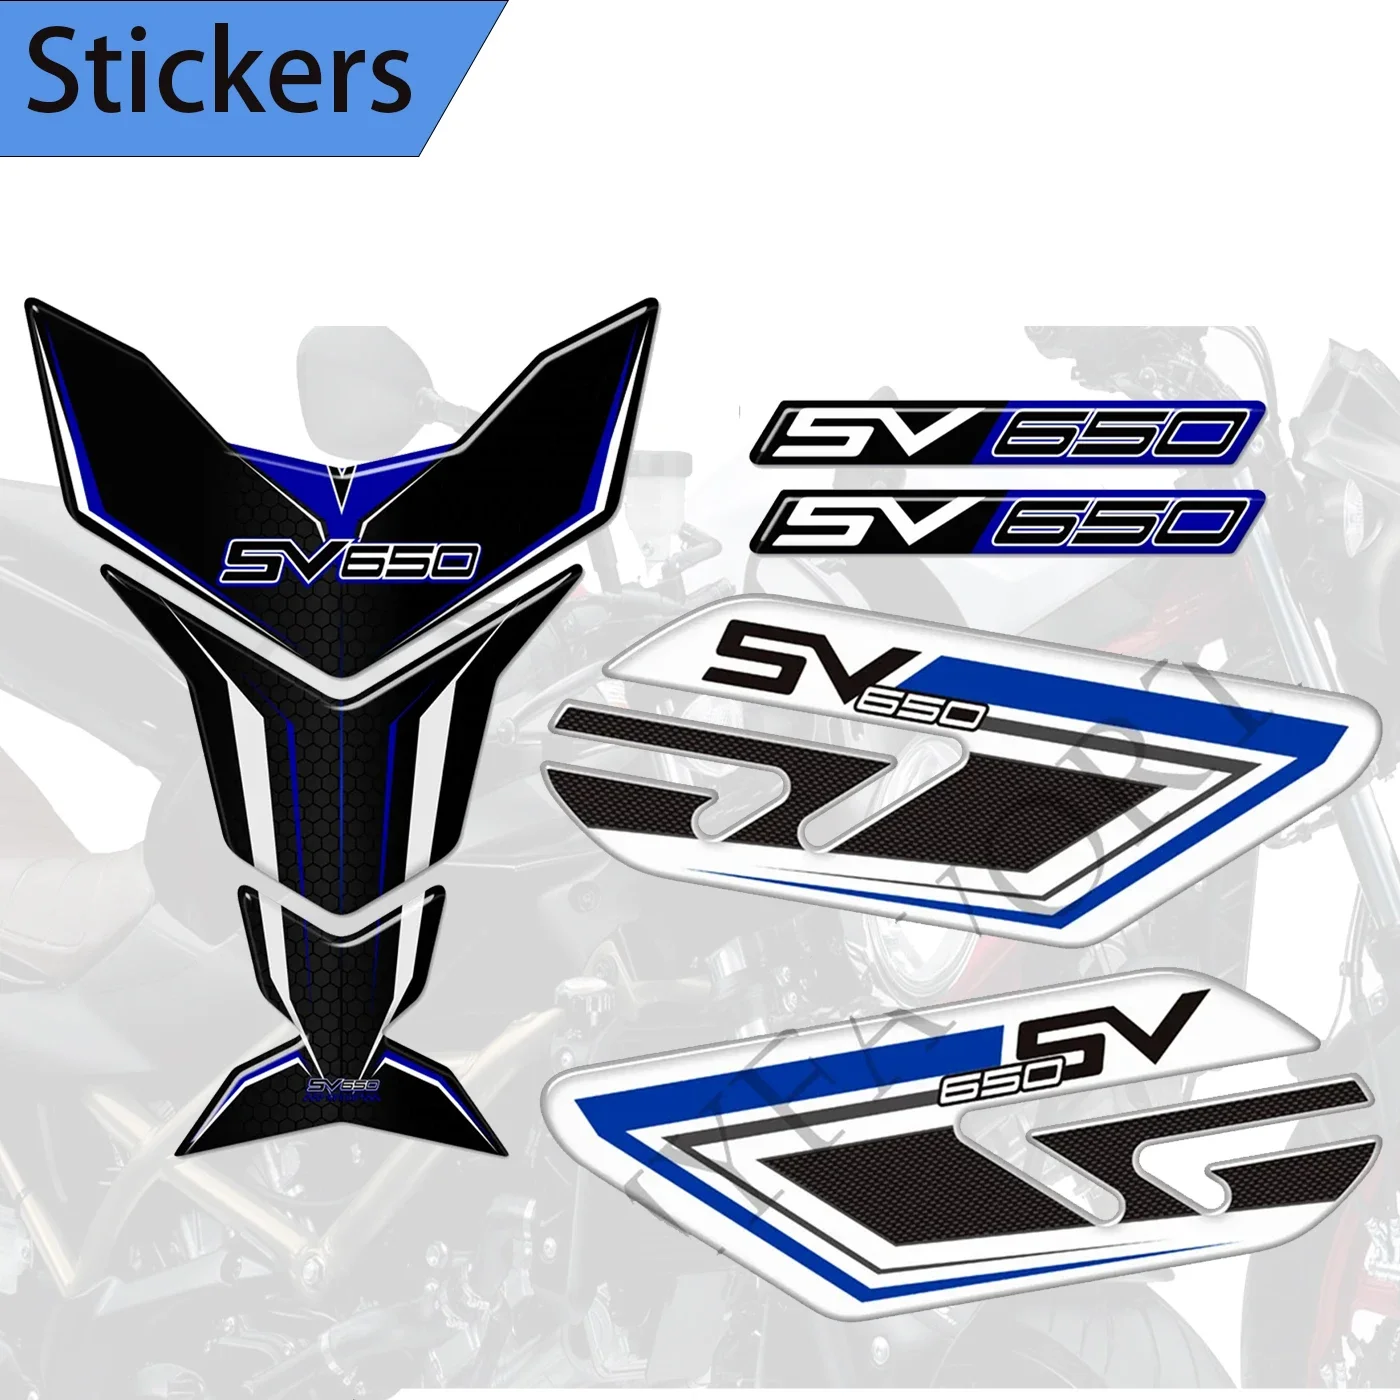 For Suzuki SV650A SV650X SV650 S X Decals Tank Pad Grips Protector Gas Fuel Oil Knee 2016 2017 -2022 motorcycle gas fuel tank pad sticker protector fuel fuel tank decals for suzuki sv650 sv650s sv650x sv 650